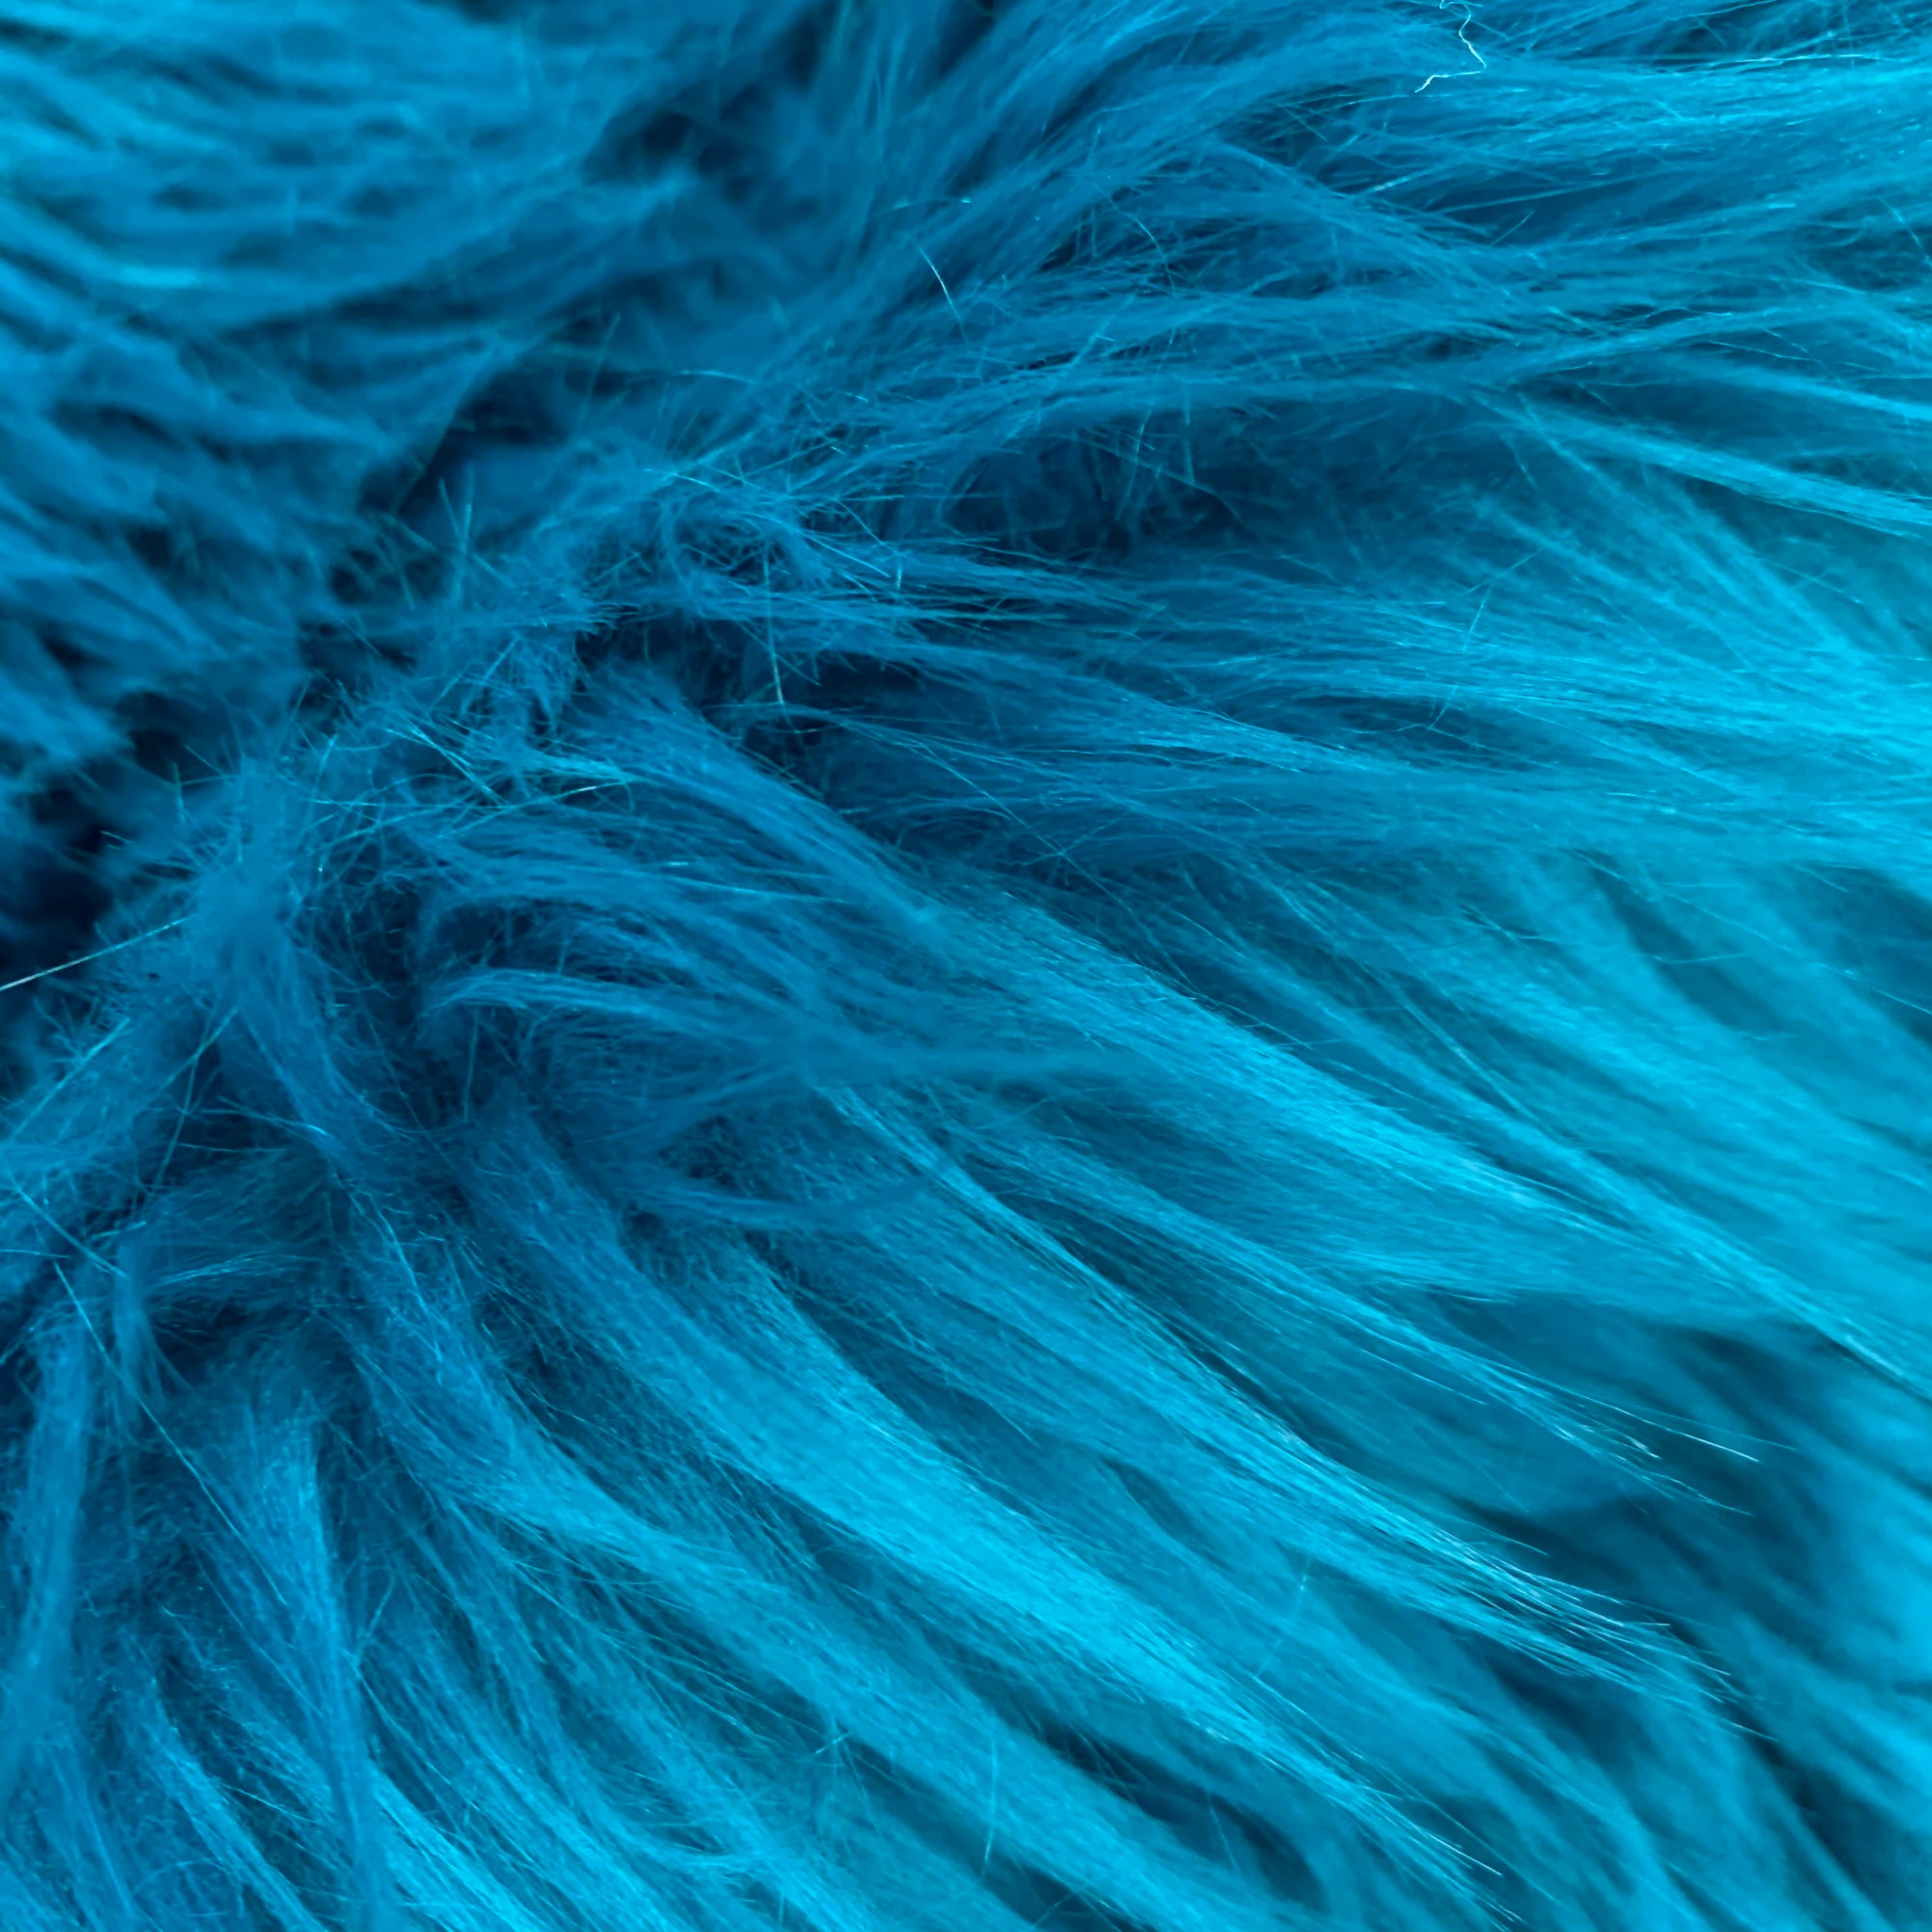 Eden TURQUOISE Shaggy Long Pile Soft Faux Fur Fabric for Fursuit, Cosplay Costume, Photo Prop, Trim, Throw Pillow, Crafts